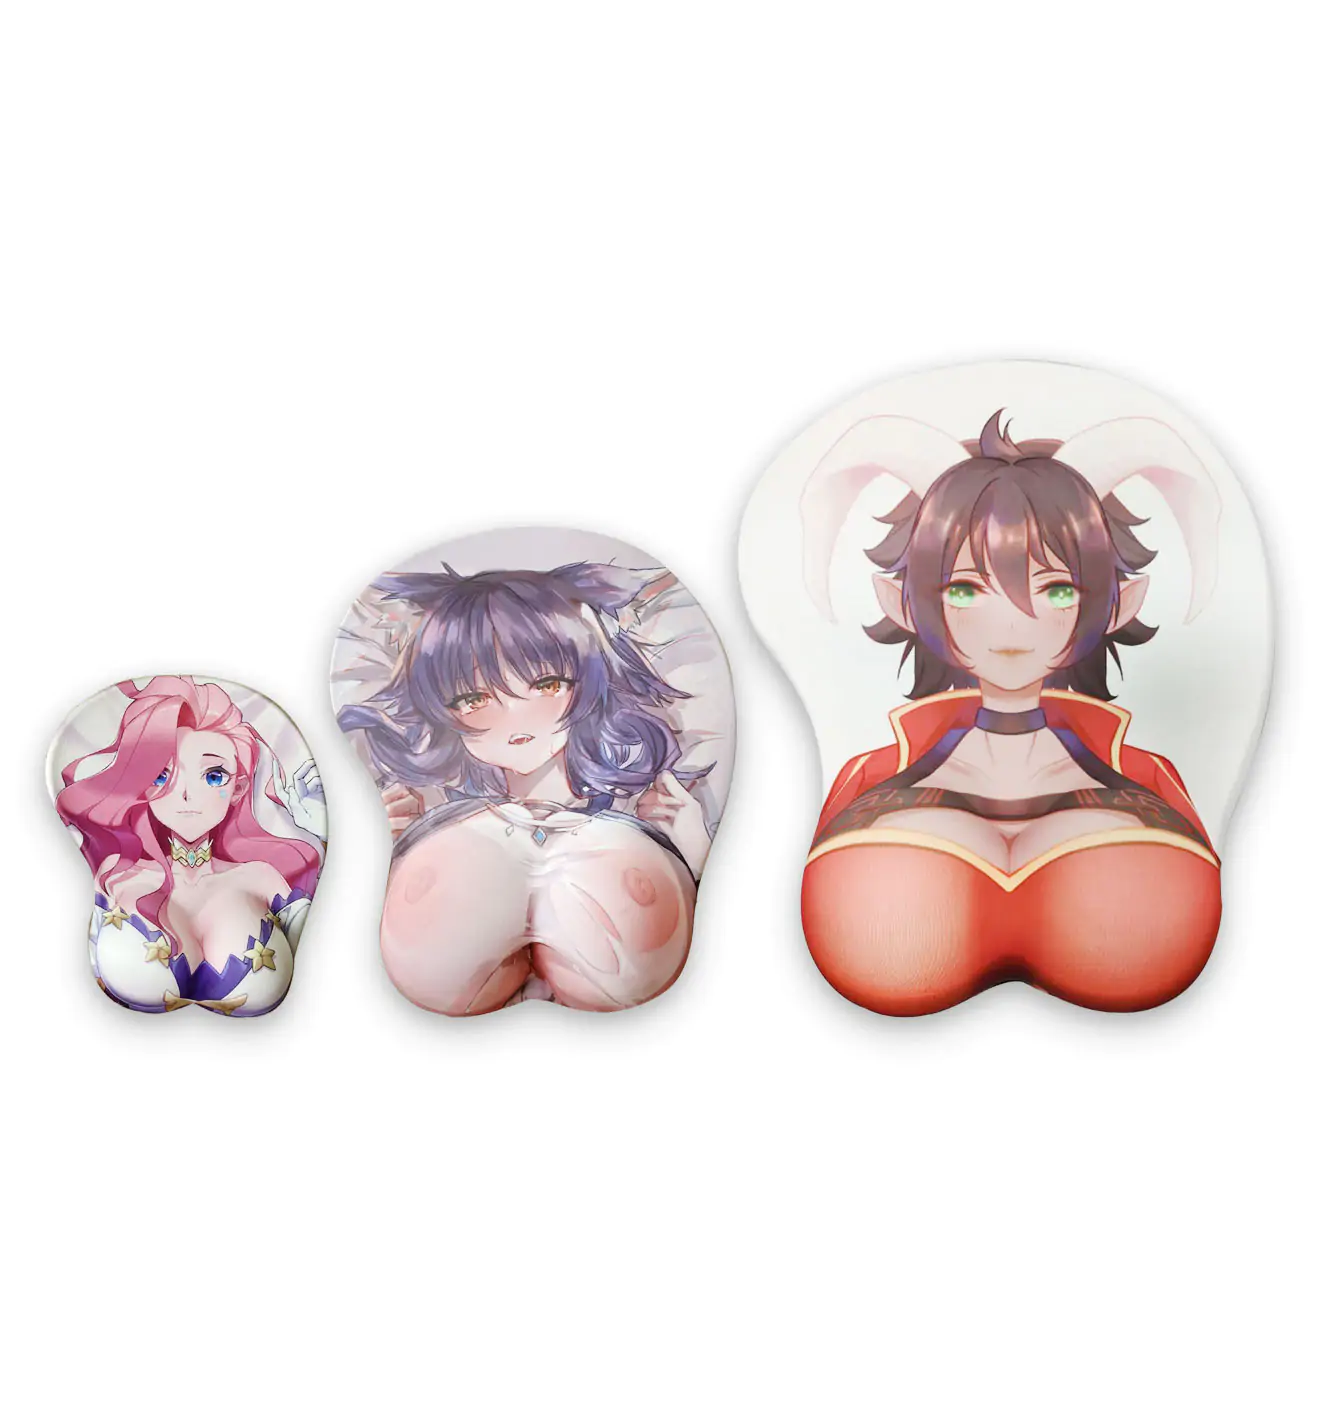 fischl life size oppai mousepad 3088 - Boobie Mouse Pad